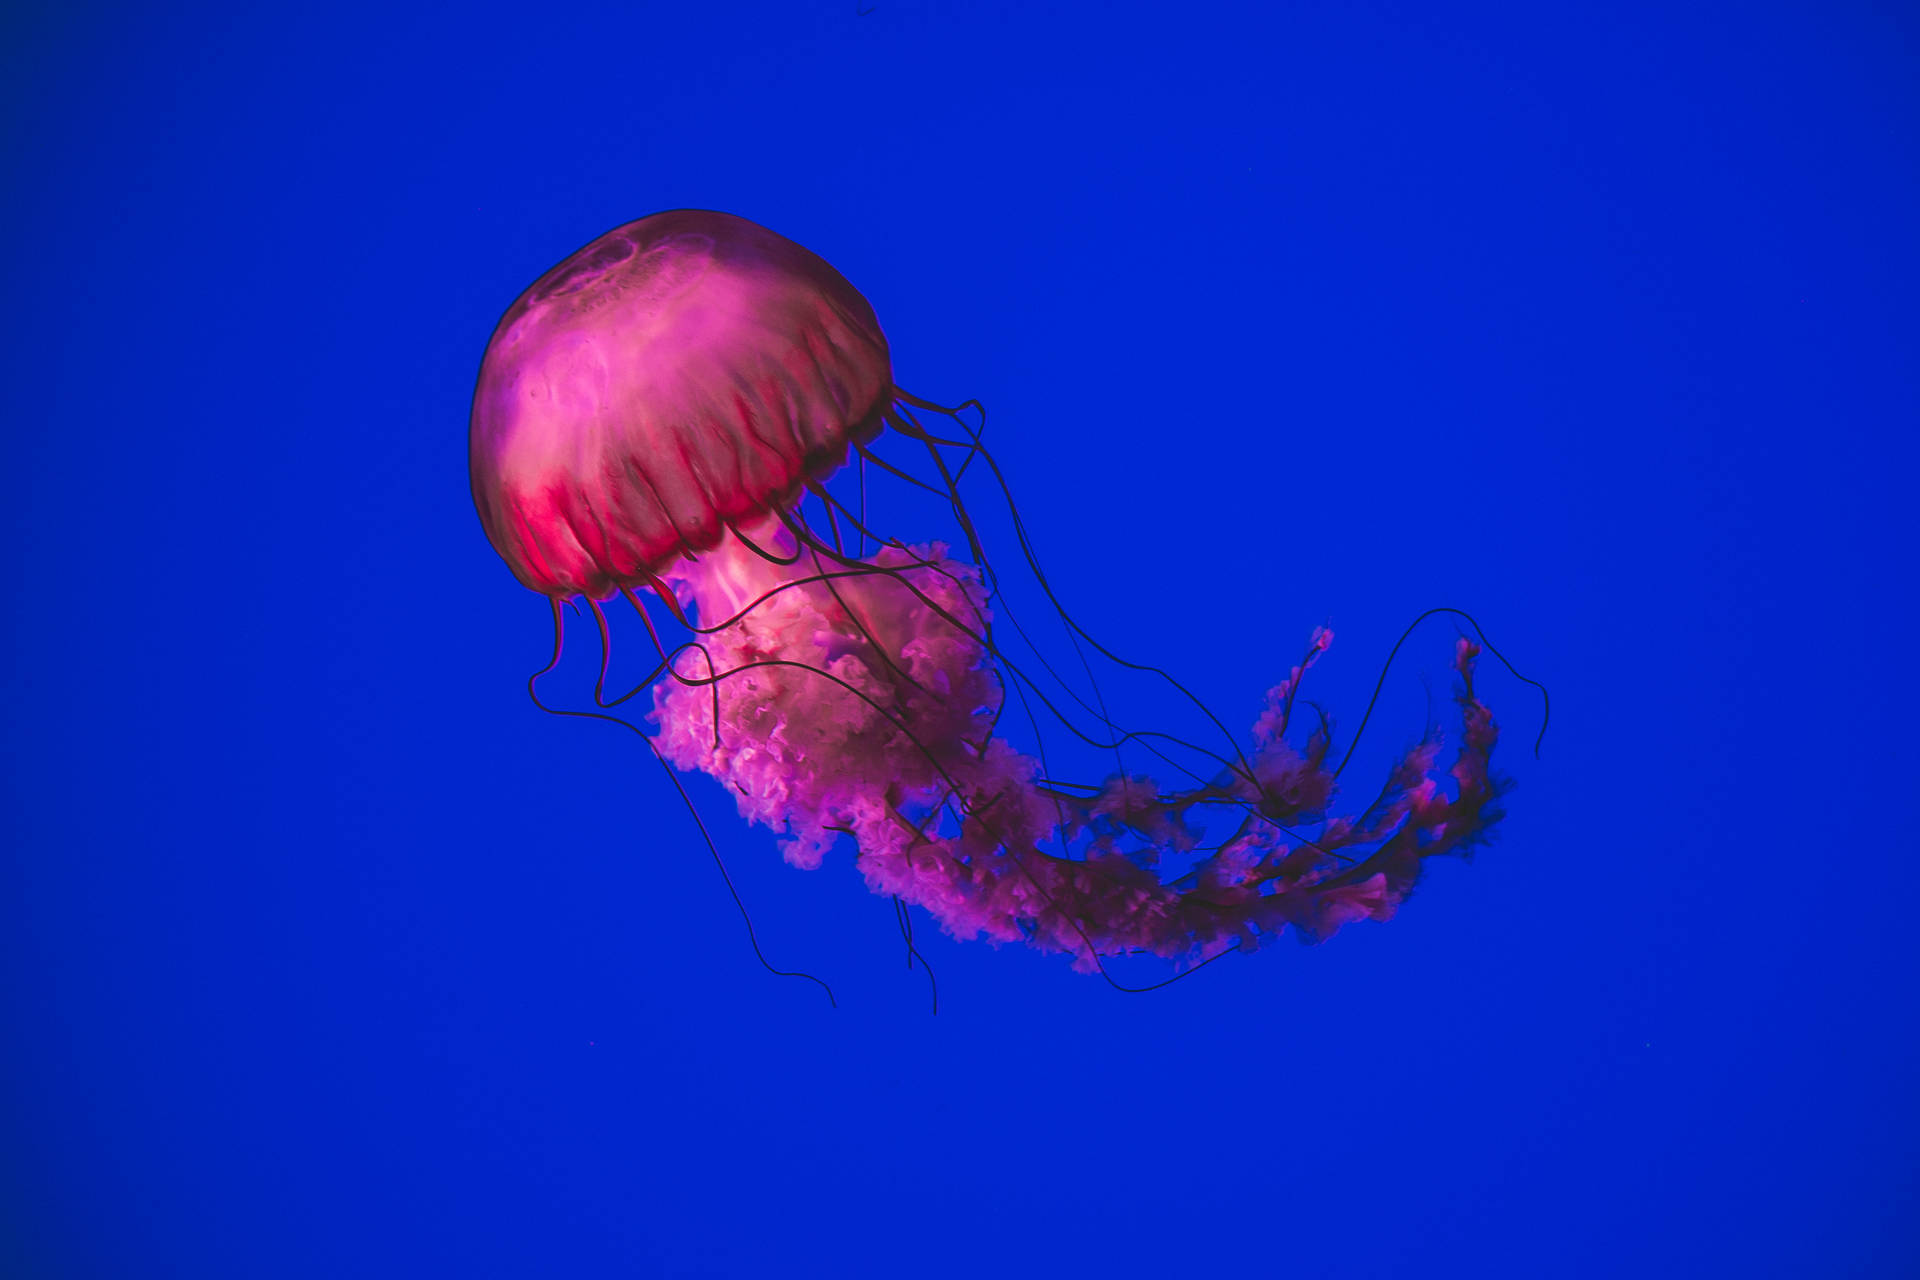 Jellyfish 4896X3264 Wallpaper and Background Image